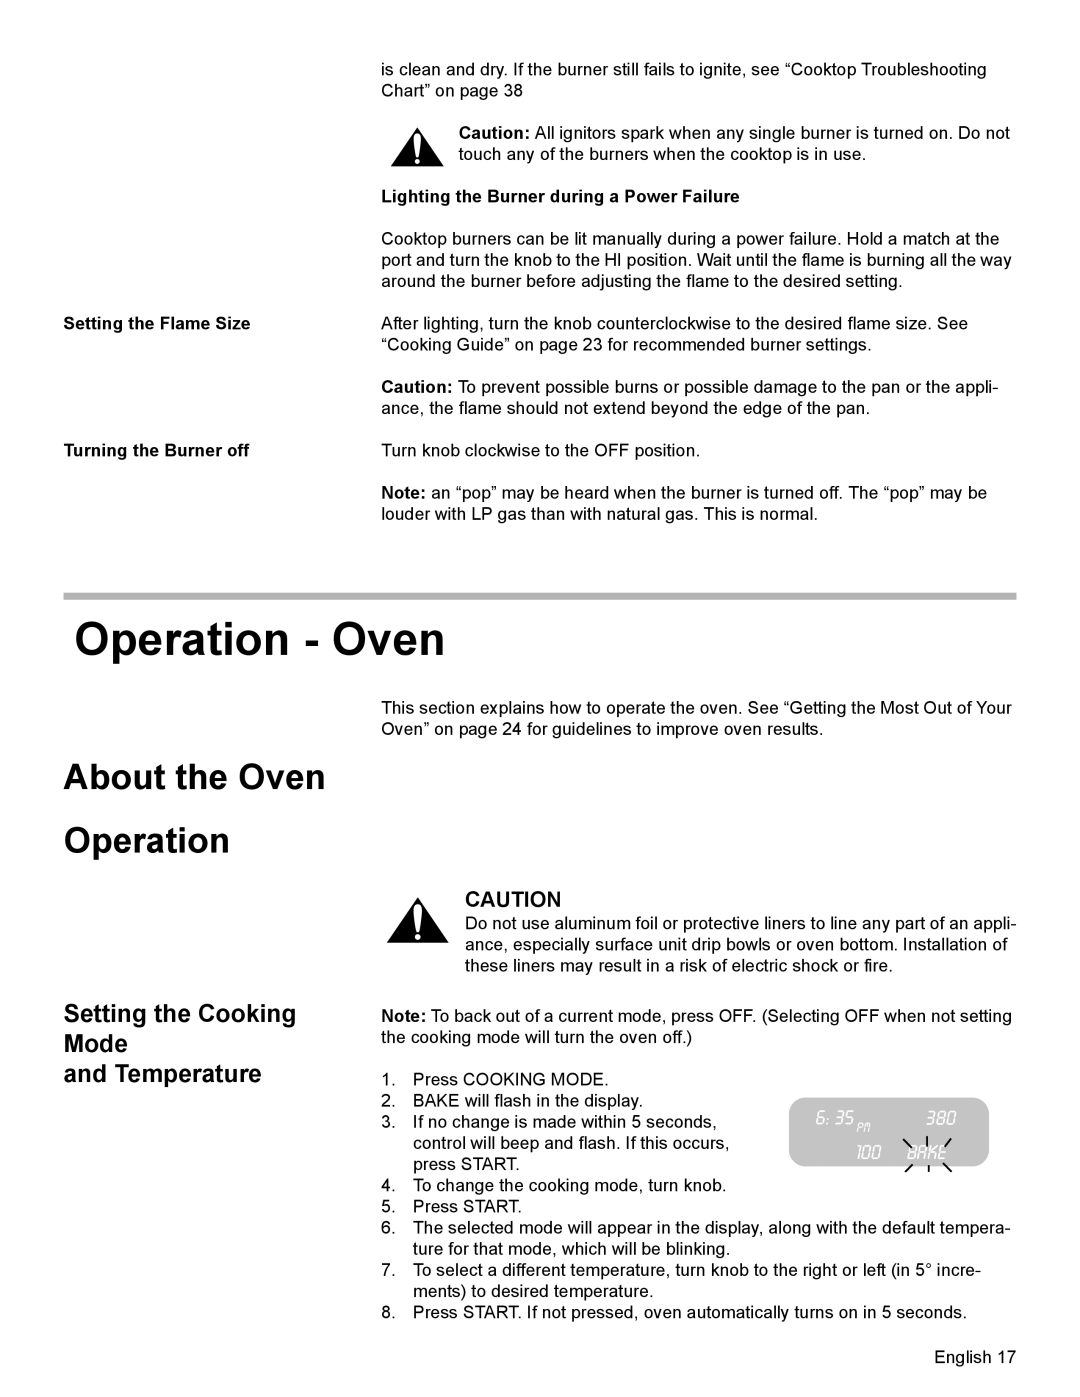 Bosch Appliances HGS7282UC Operation - Oven, About the Oven Operation, Setting the Cooking Mode and Temperature, 6 35 PM 